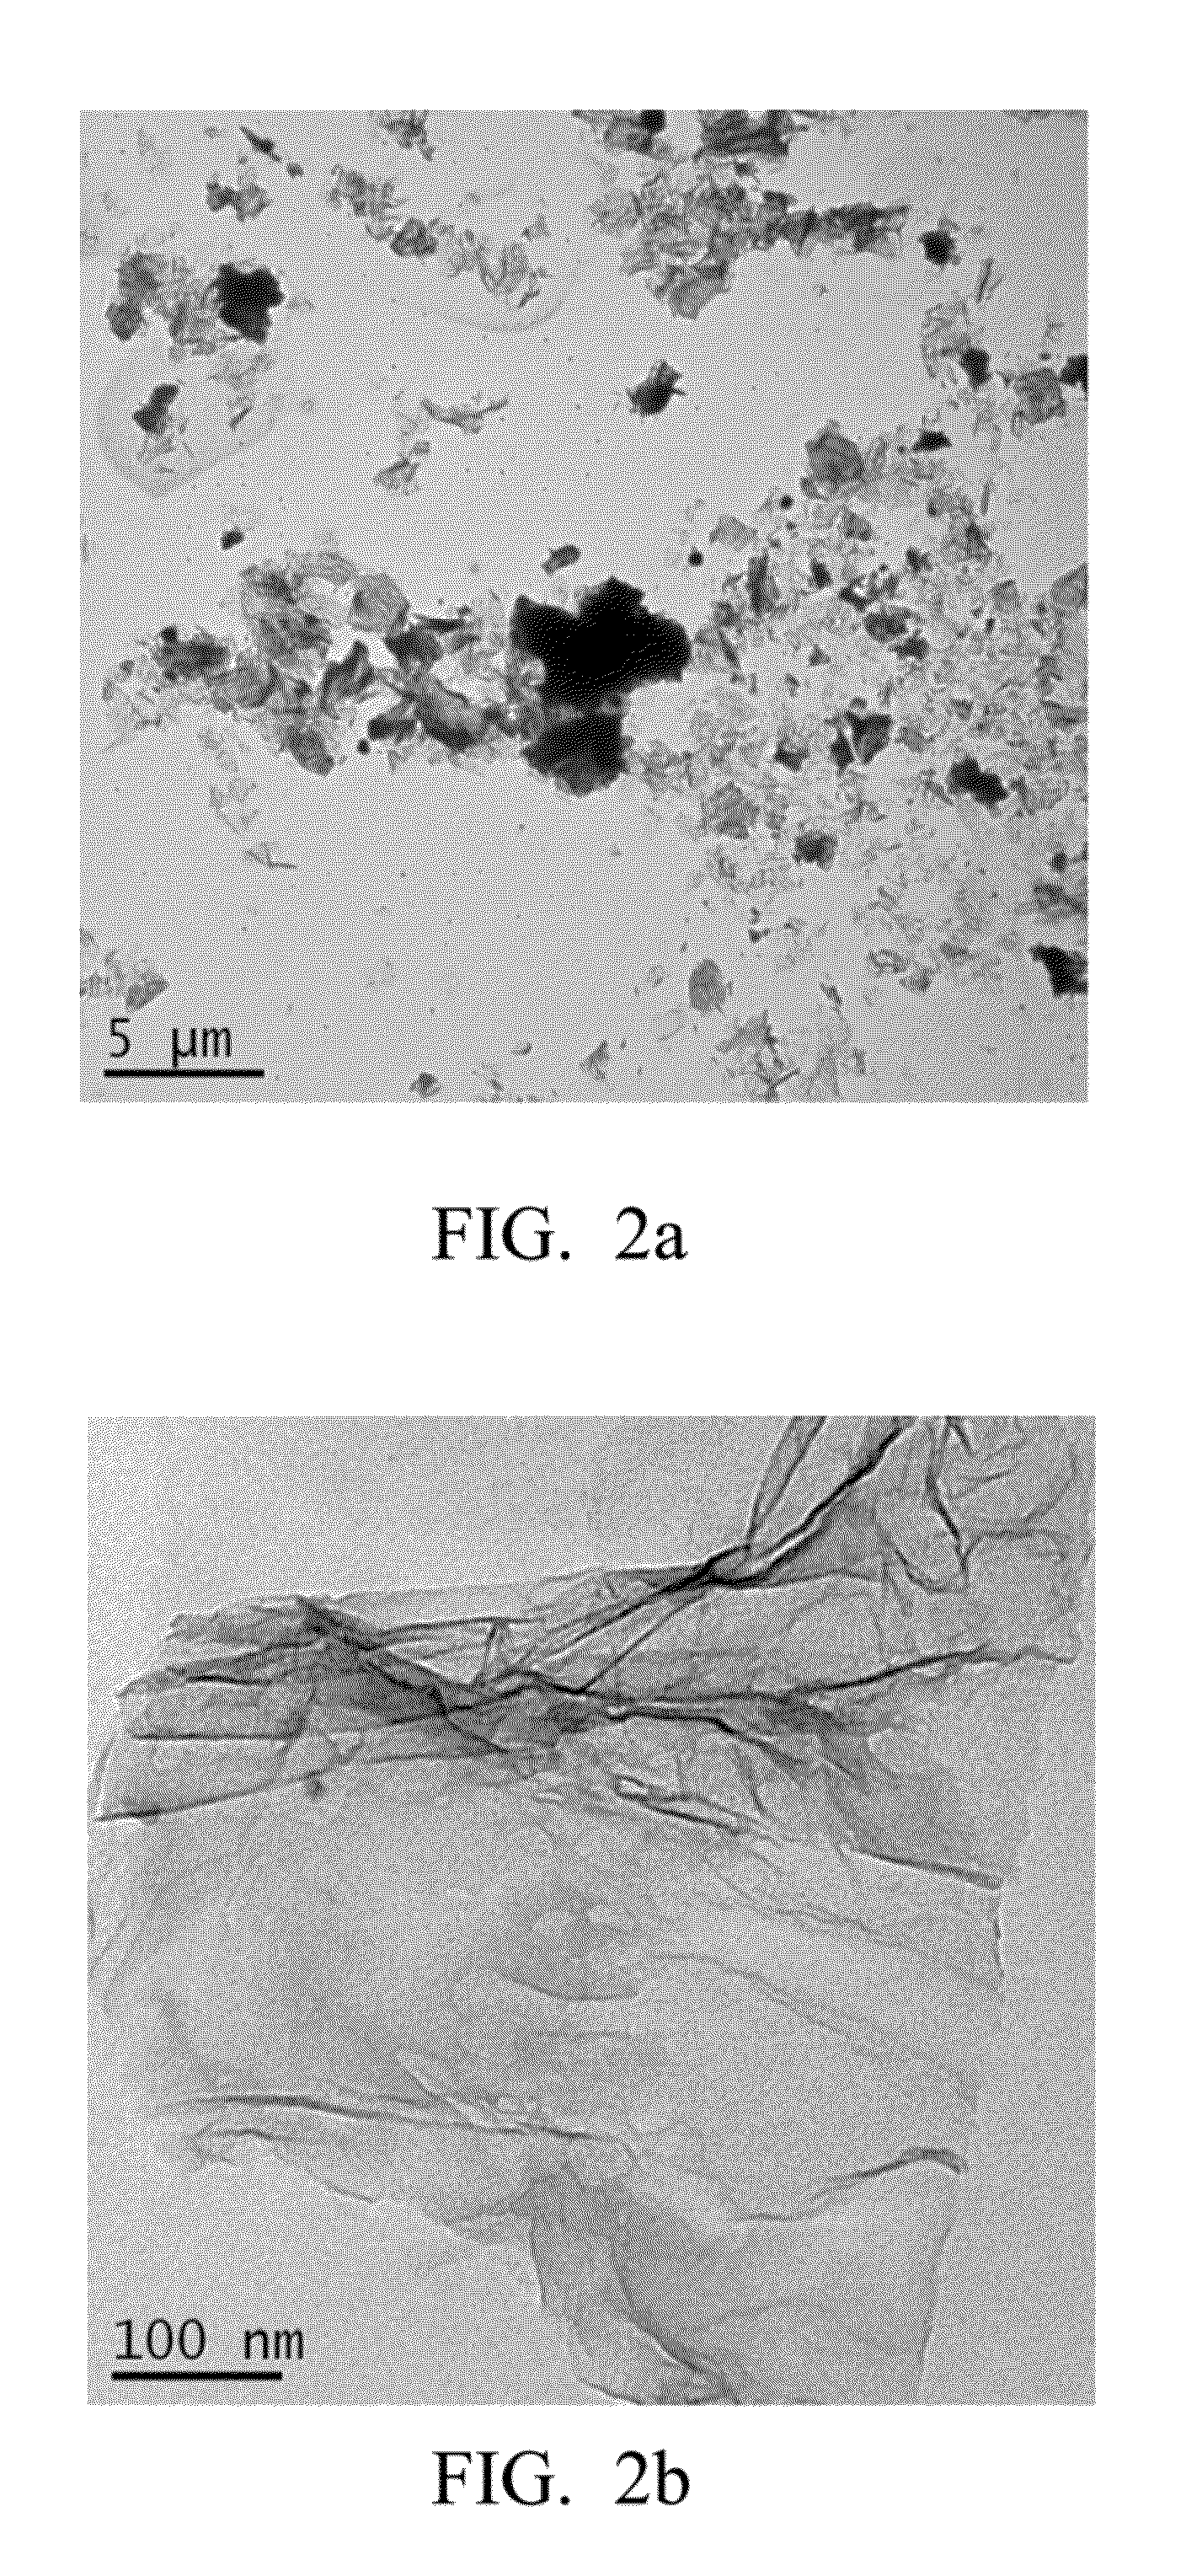 Method of producing highly dispersed graphene organic dispersion and application thereof